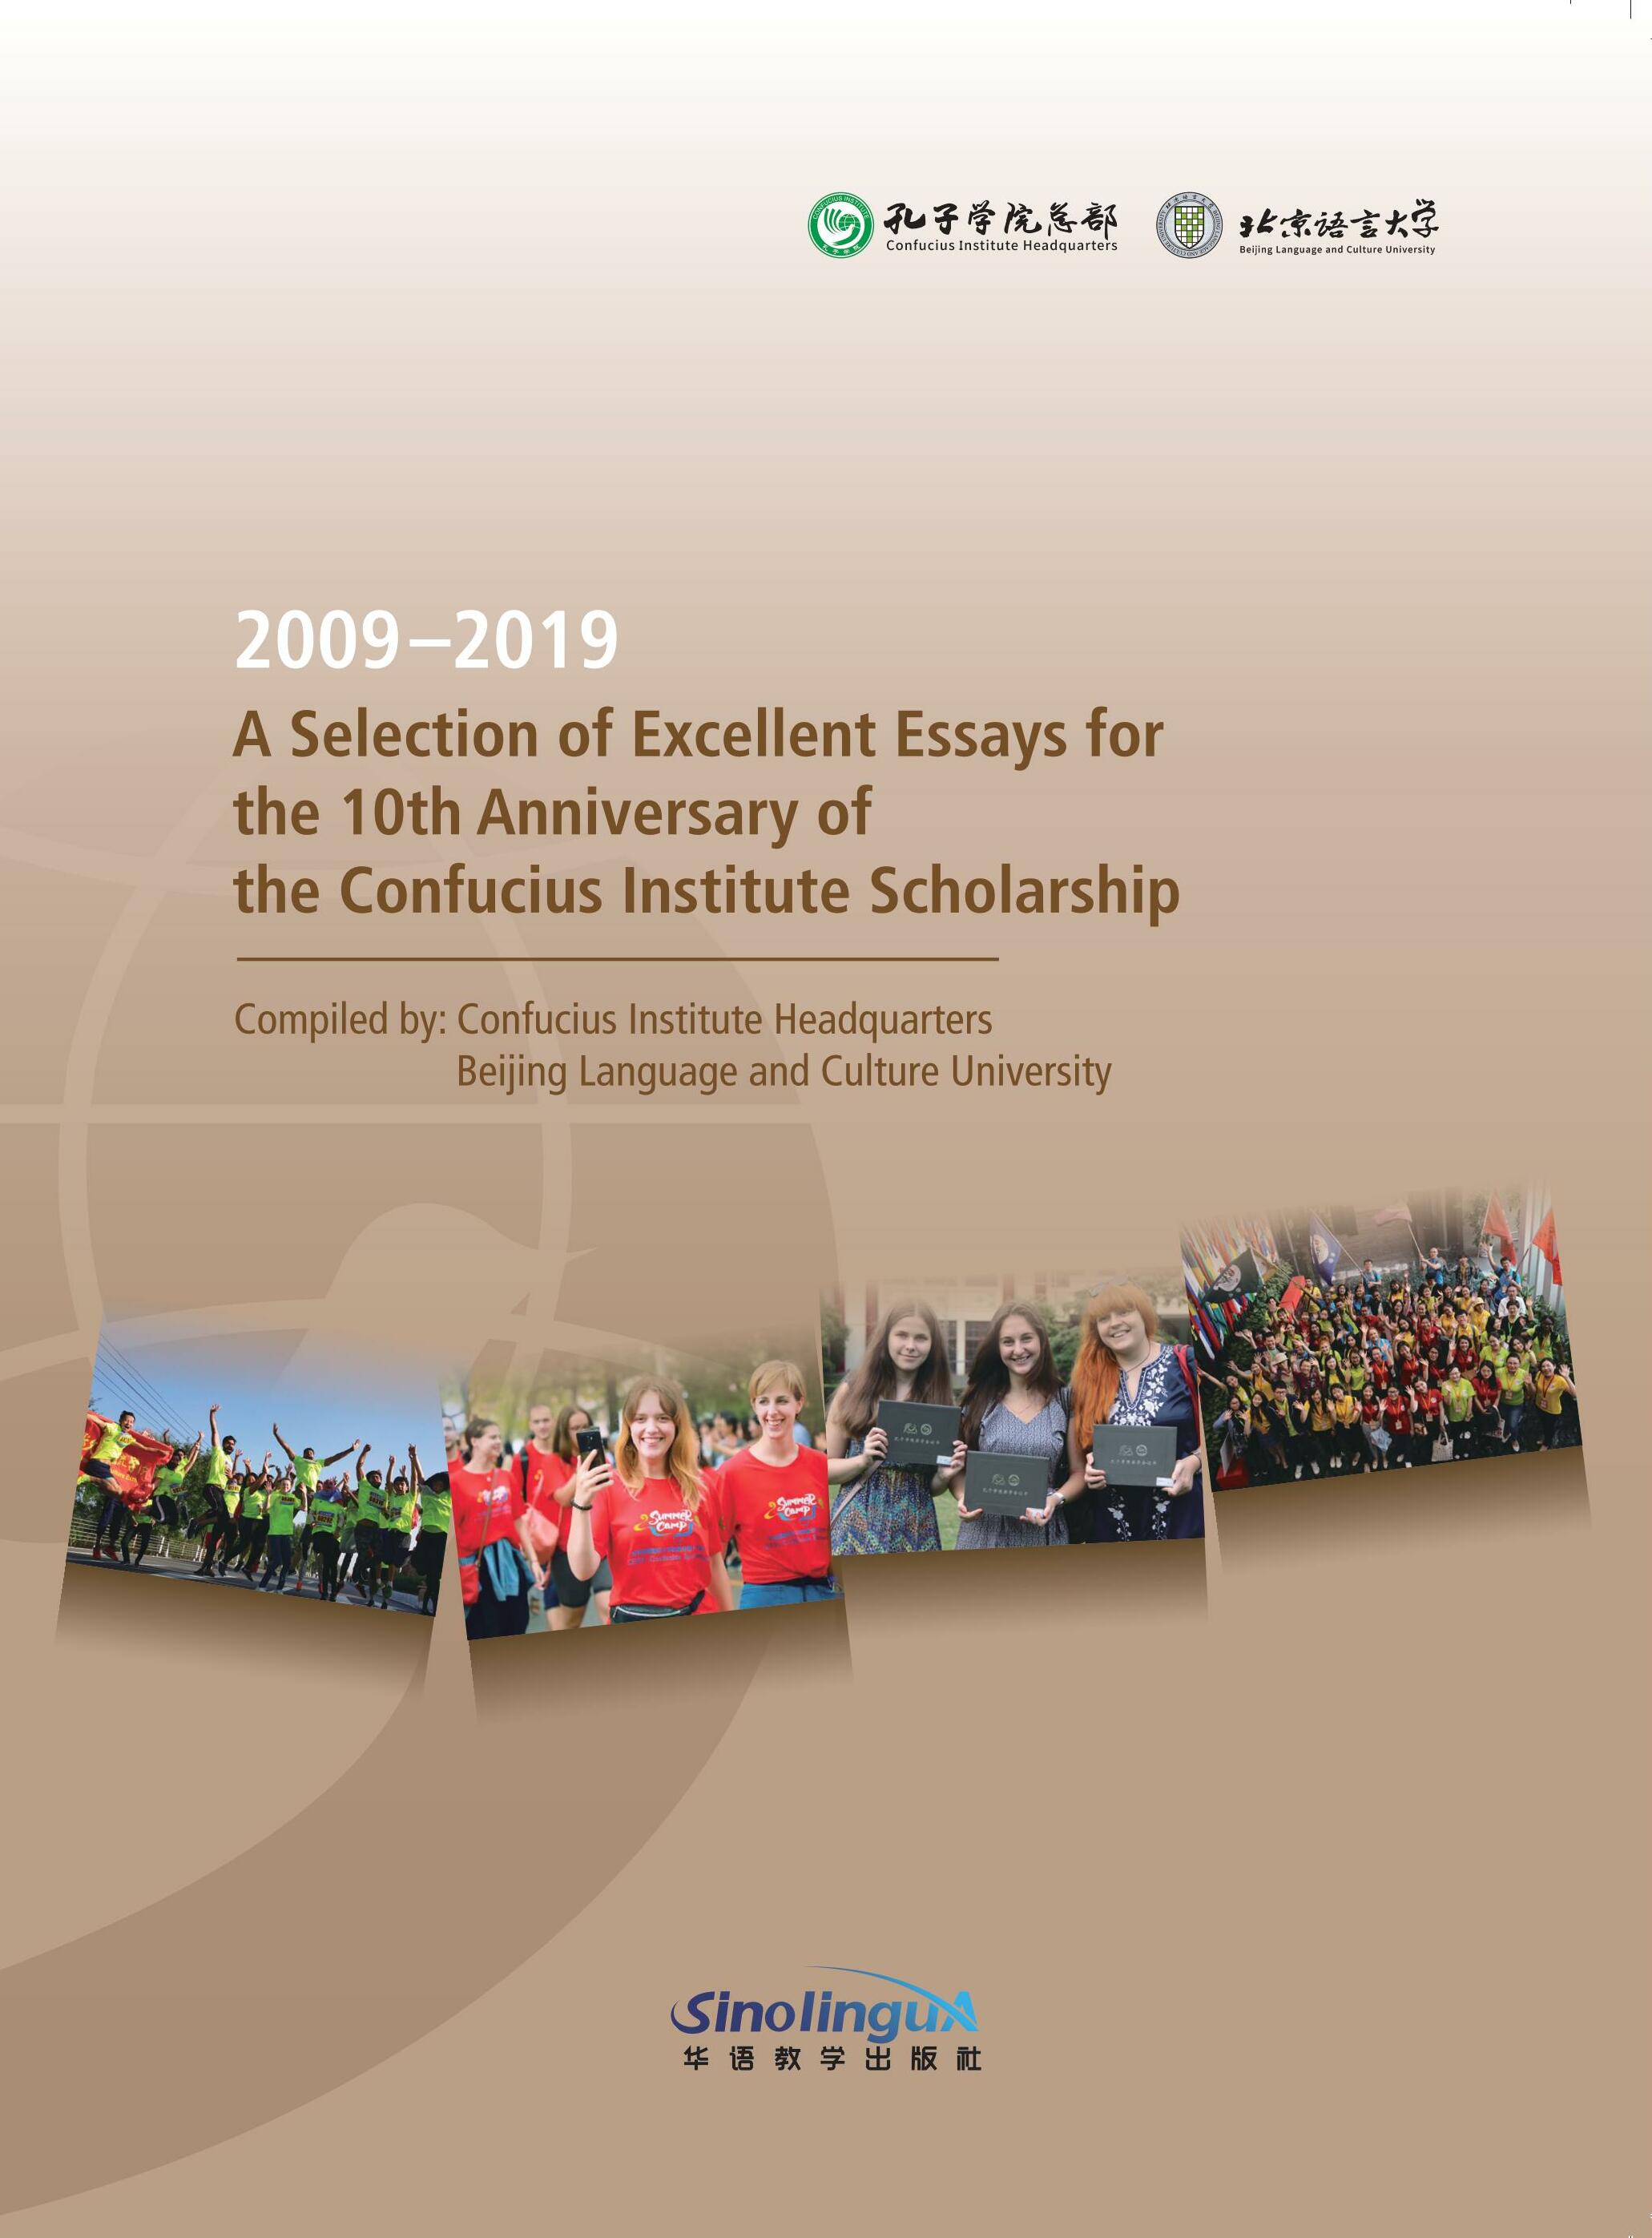 2009-2019A Selection of Excellent Essays for the 10th Anniversary of the Confucius Institute Scholarship ( English Version)